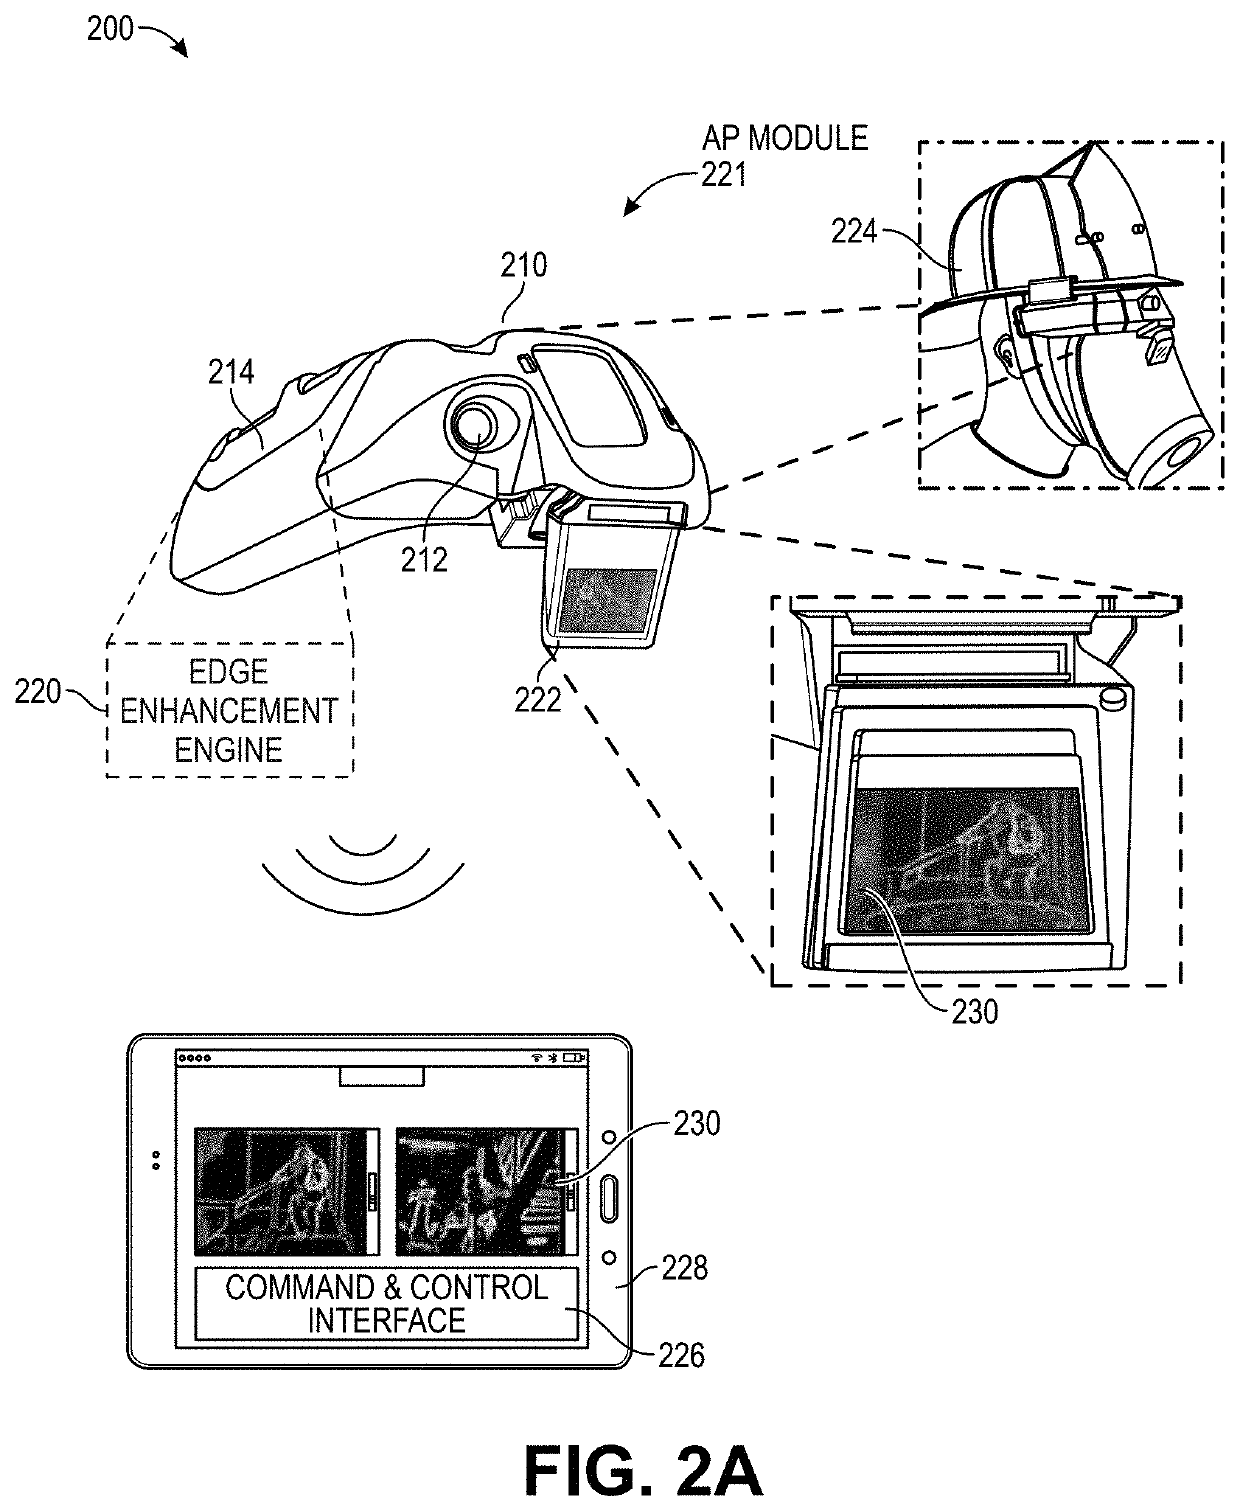 Wearable assisted perception module for navigation and communication in hazardous environments